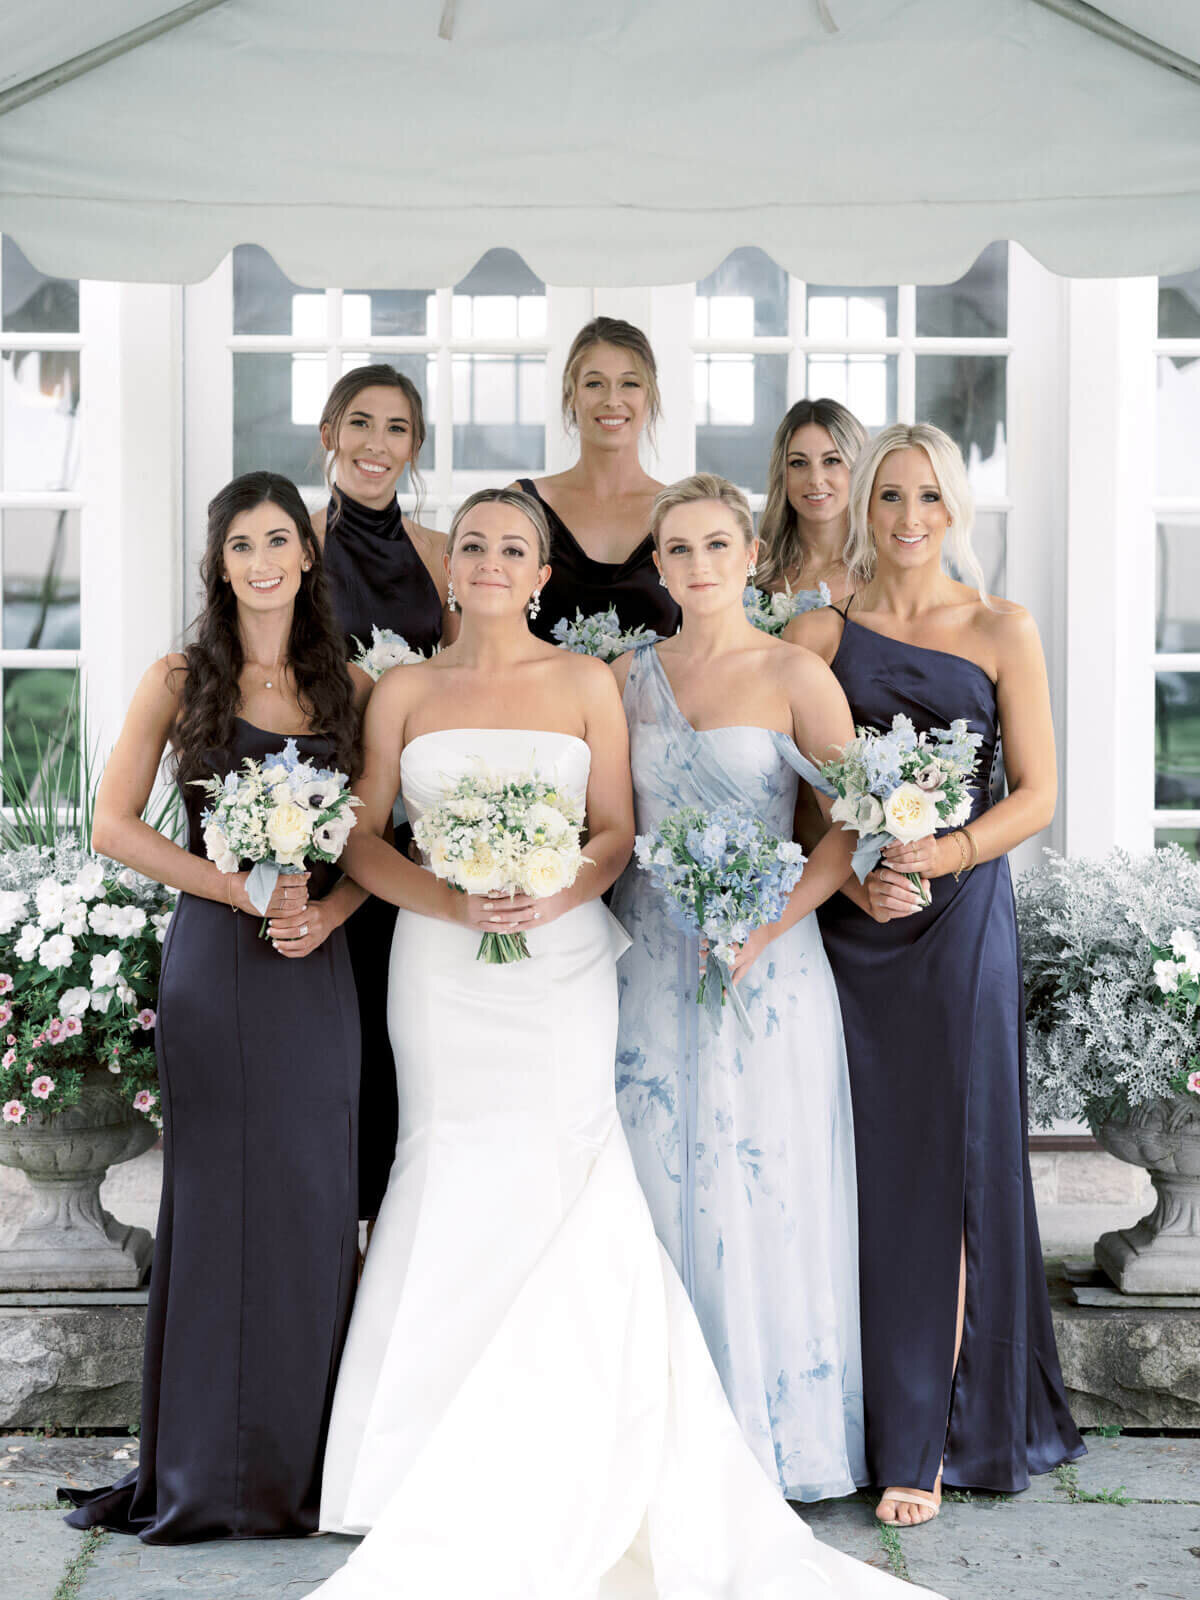 The beautiful bride and her pretty bridesmaids are holding flower bouquets at Lion Rock Farm, CT.  Image by Jenny Fu Studio